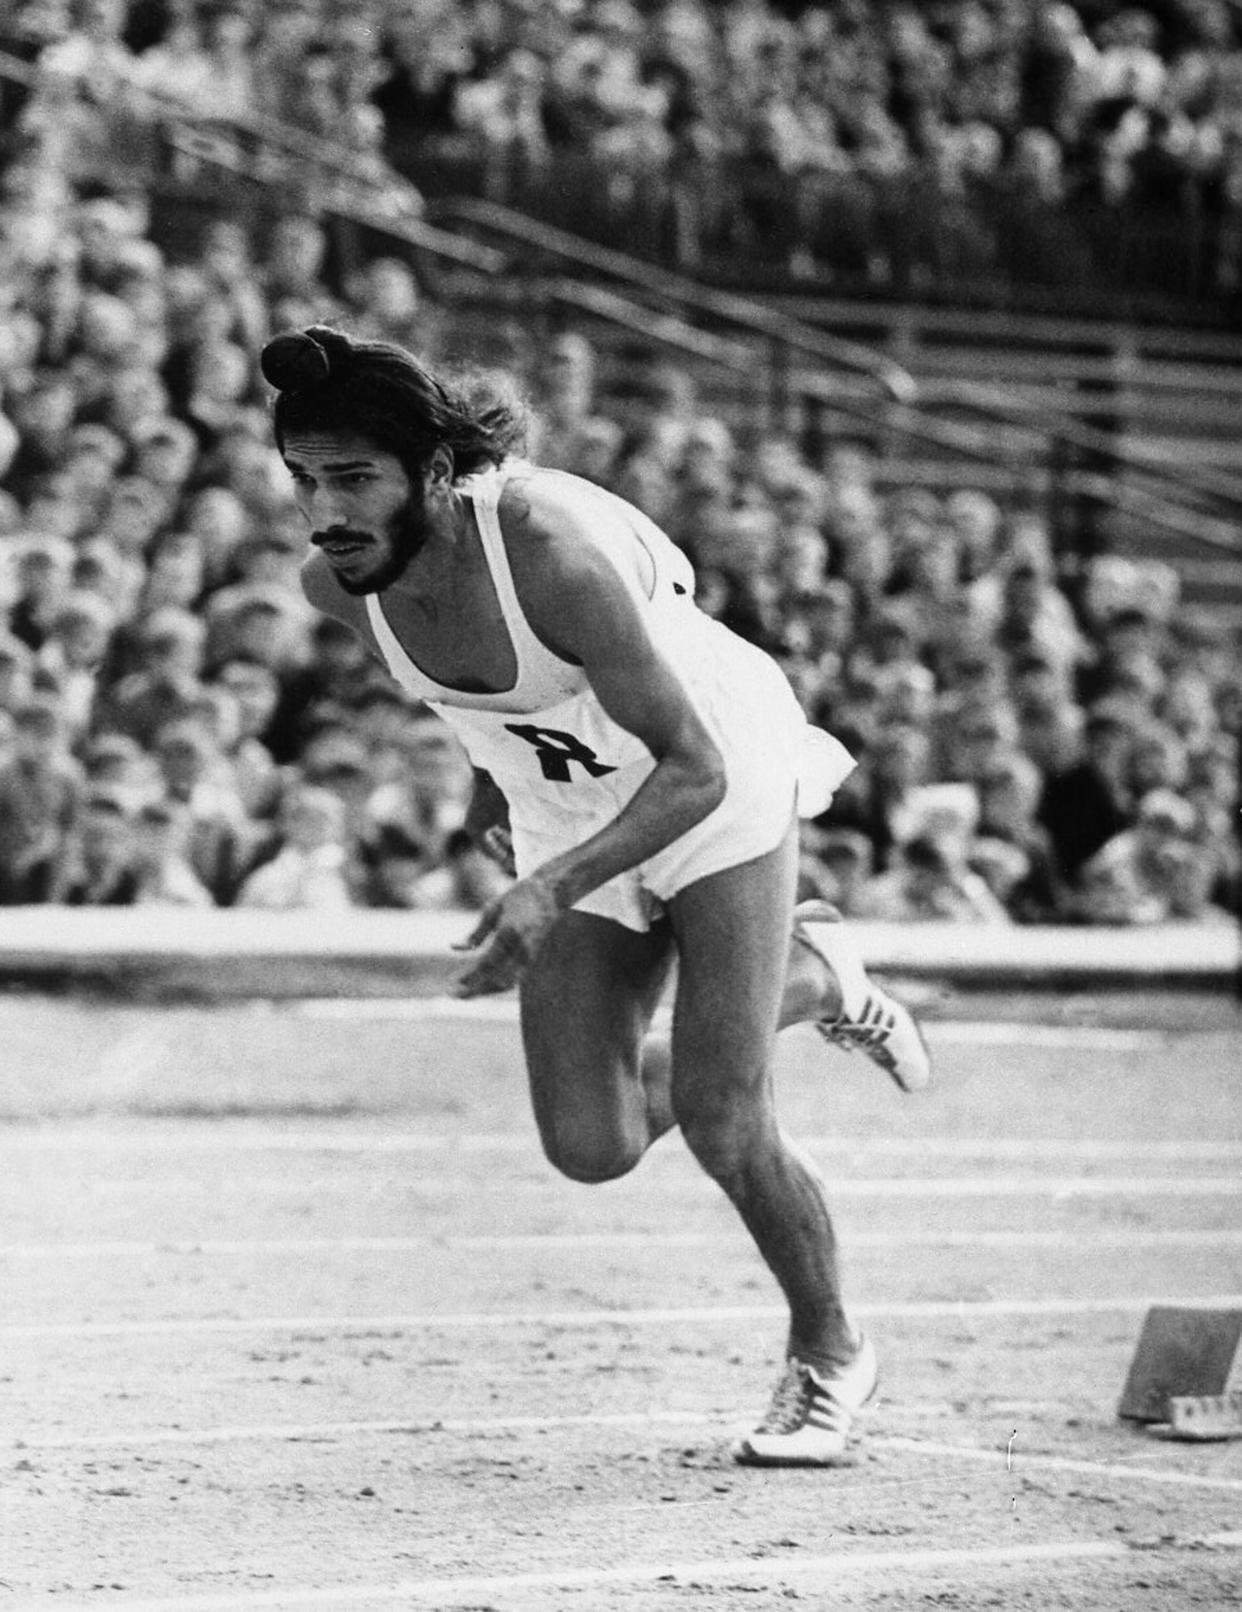 Milkha Singh, the famed Indian middle-distance runner starts the 400 metres race in the Janusz Kusocinski Memorial Track and Field MeetinG, in Warsaw, Poland, on June 20, 1961. (AP Photo)